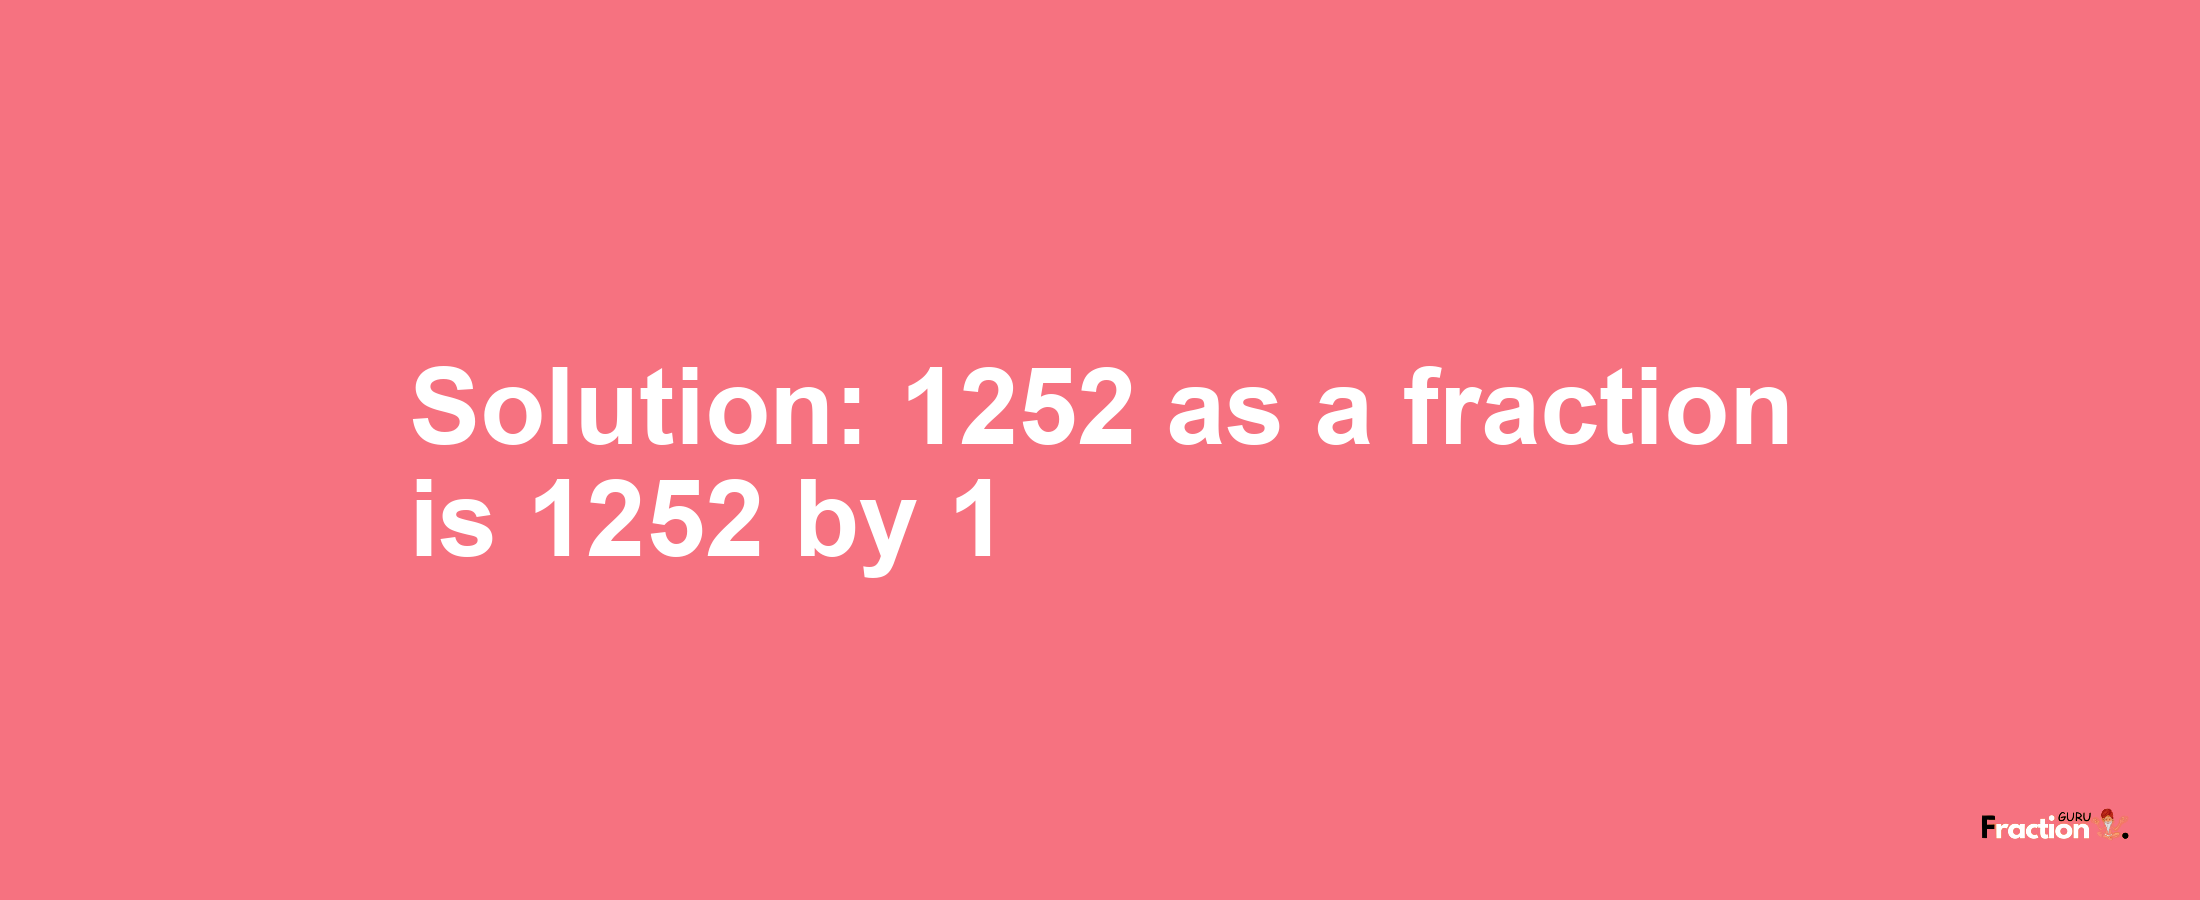 Solution:1252 as a fraction is 1252/1